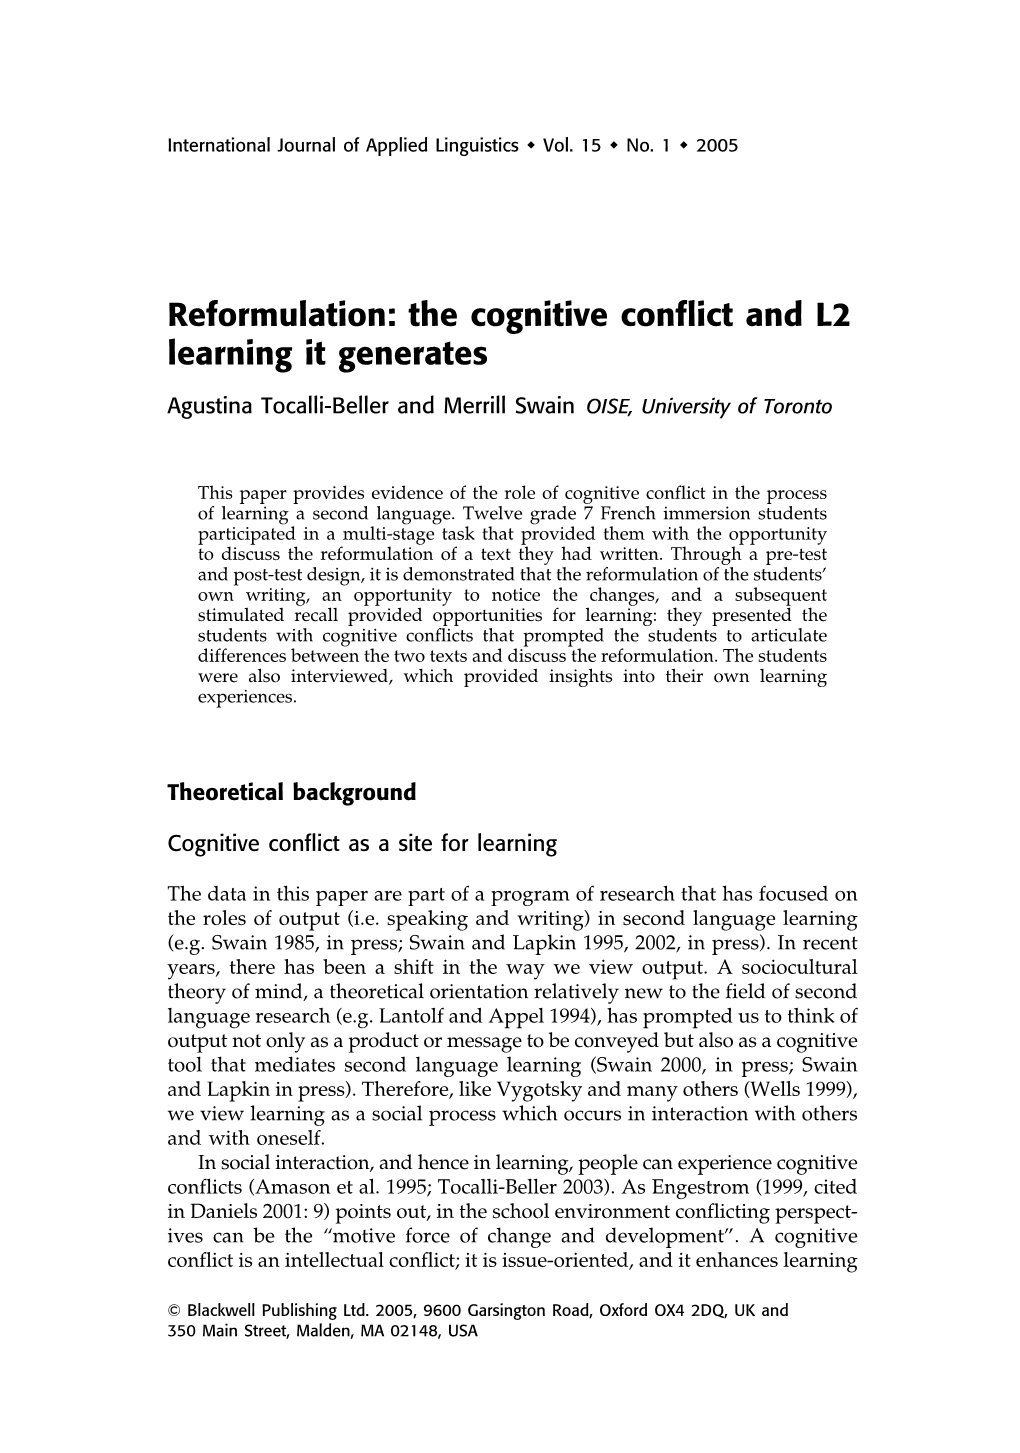 The Cognitive Conflict and L2 Learning It Generates